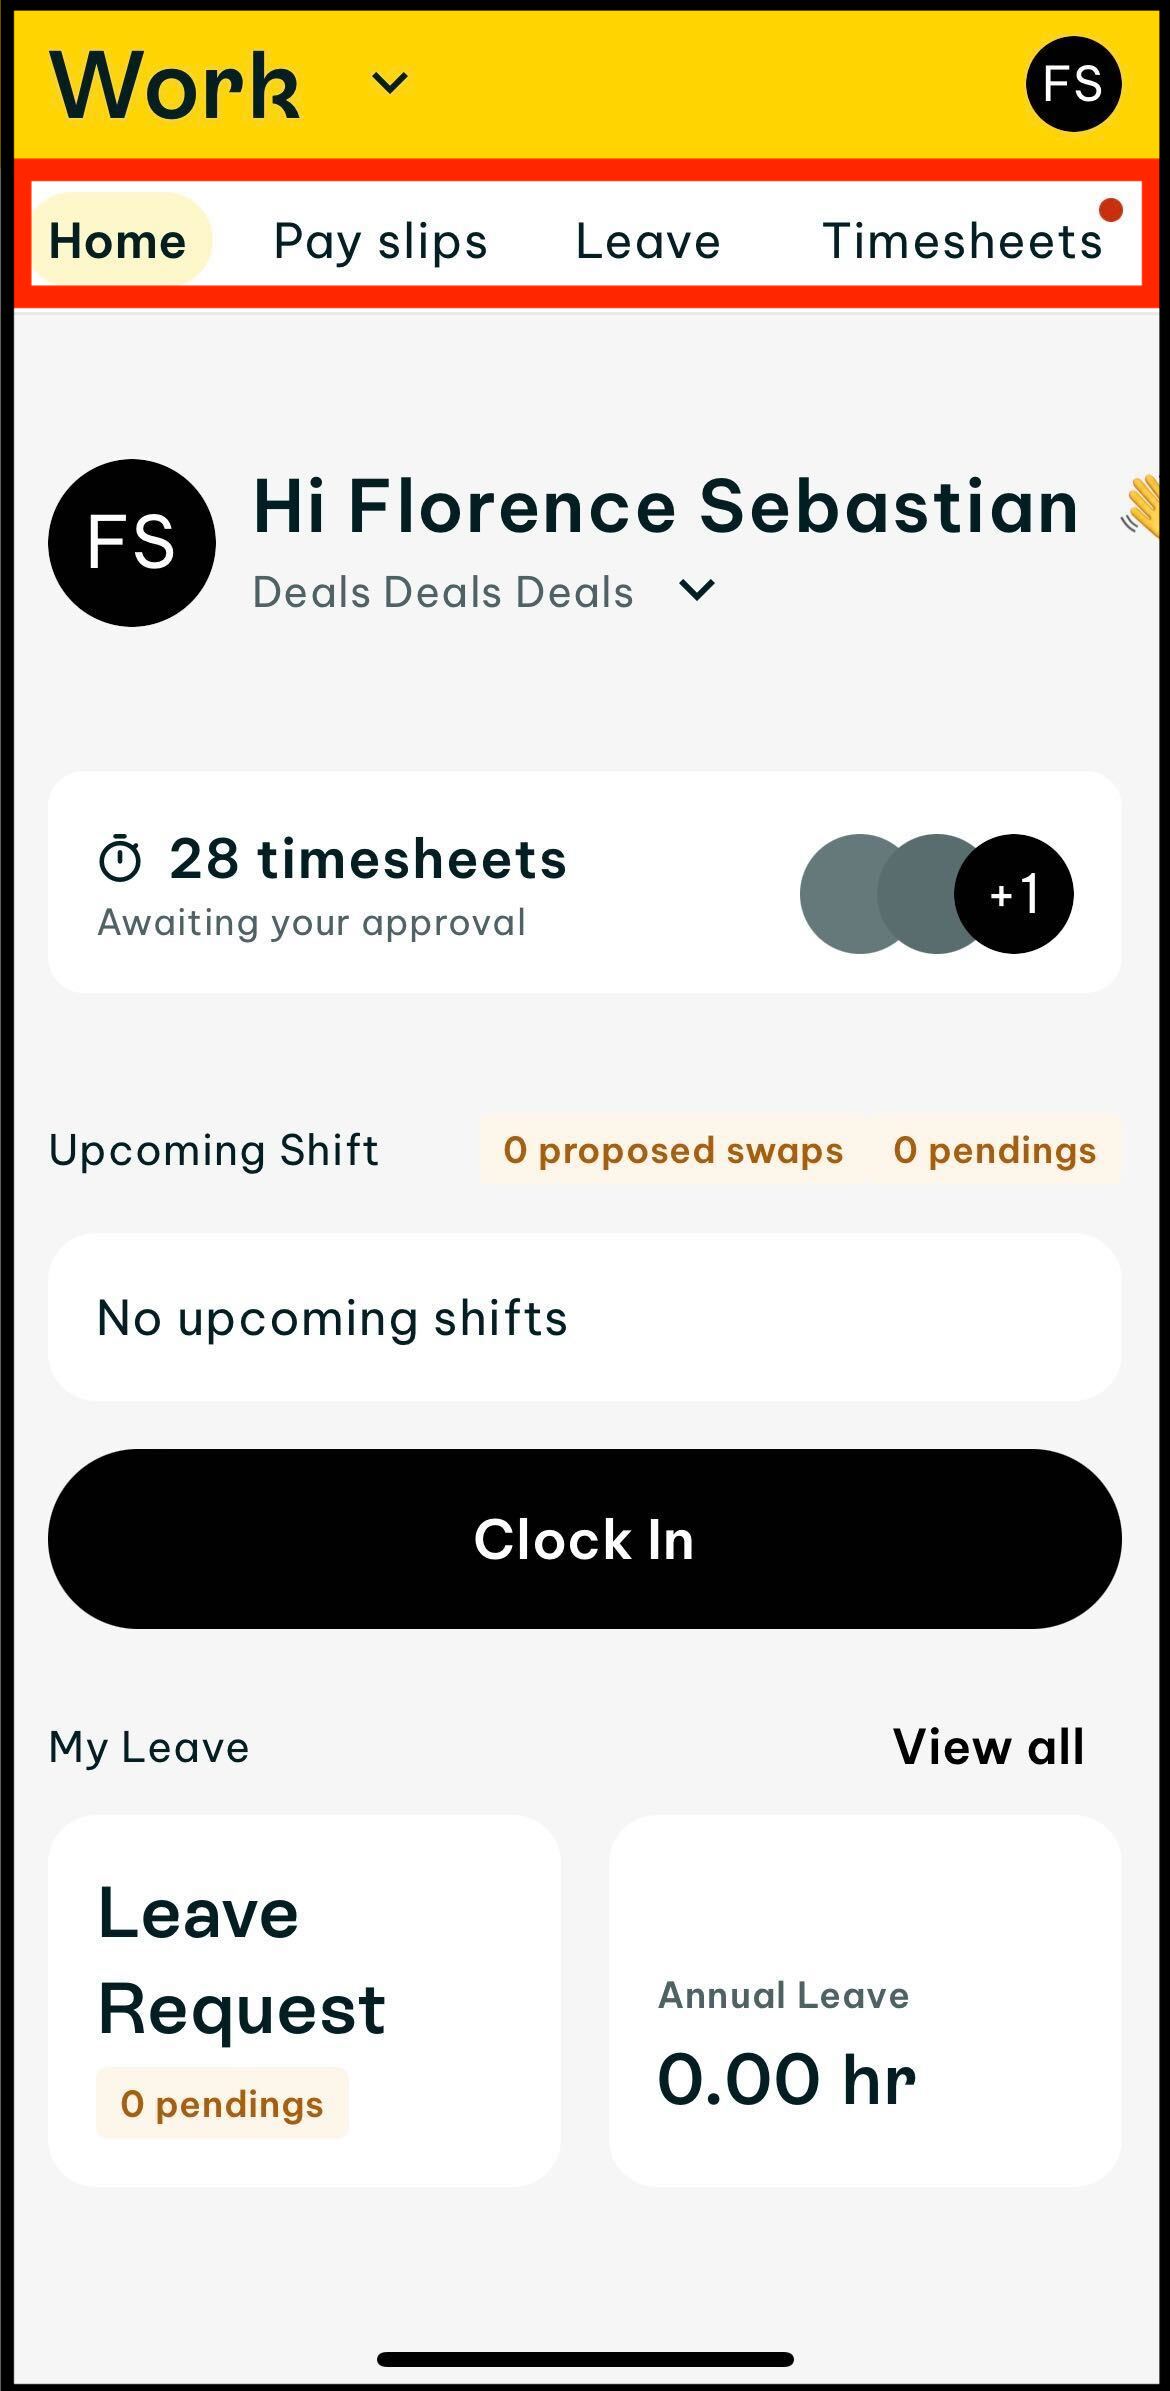 Screenshot of Work app in Swag showing the top bar showing from left to right: Home, payslips, then leave, timesheets, expenses, rosters, unavailability. Also if you see the black clock in button on your work home screen, this is a sign of payroll-only software. If you see this view when you tap on Work in Swag, and if you used to log in using the workzone app, then that means that your employer is using payroll only software.